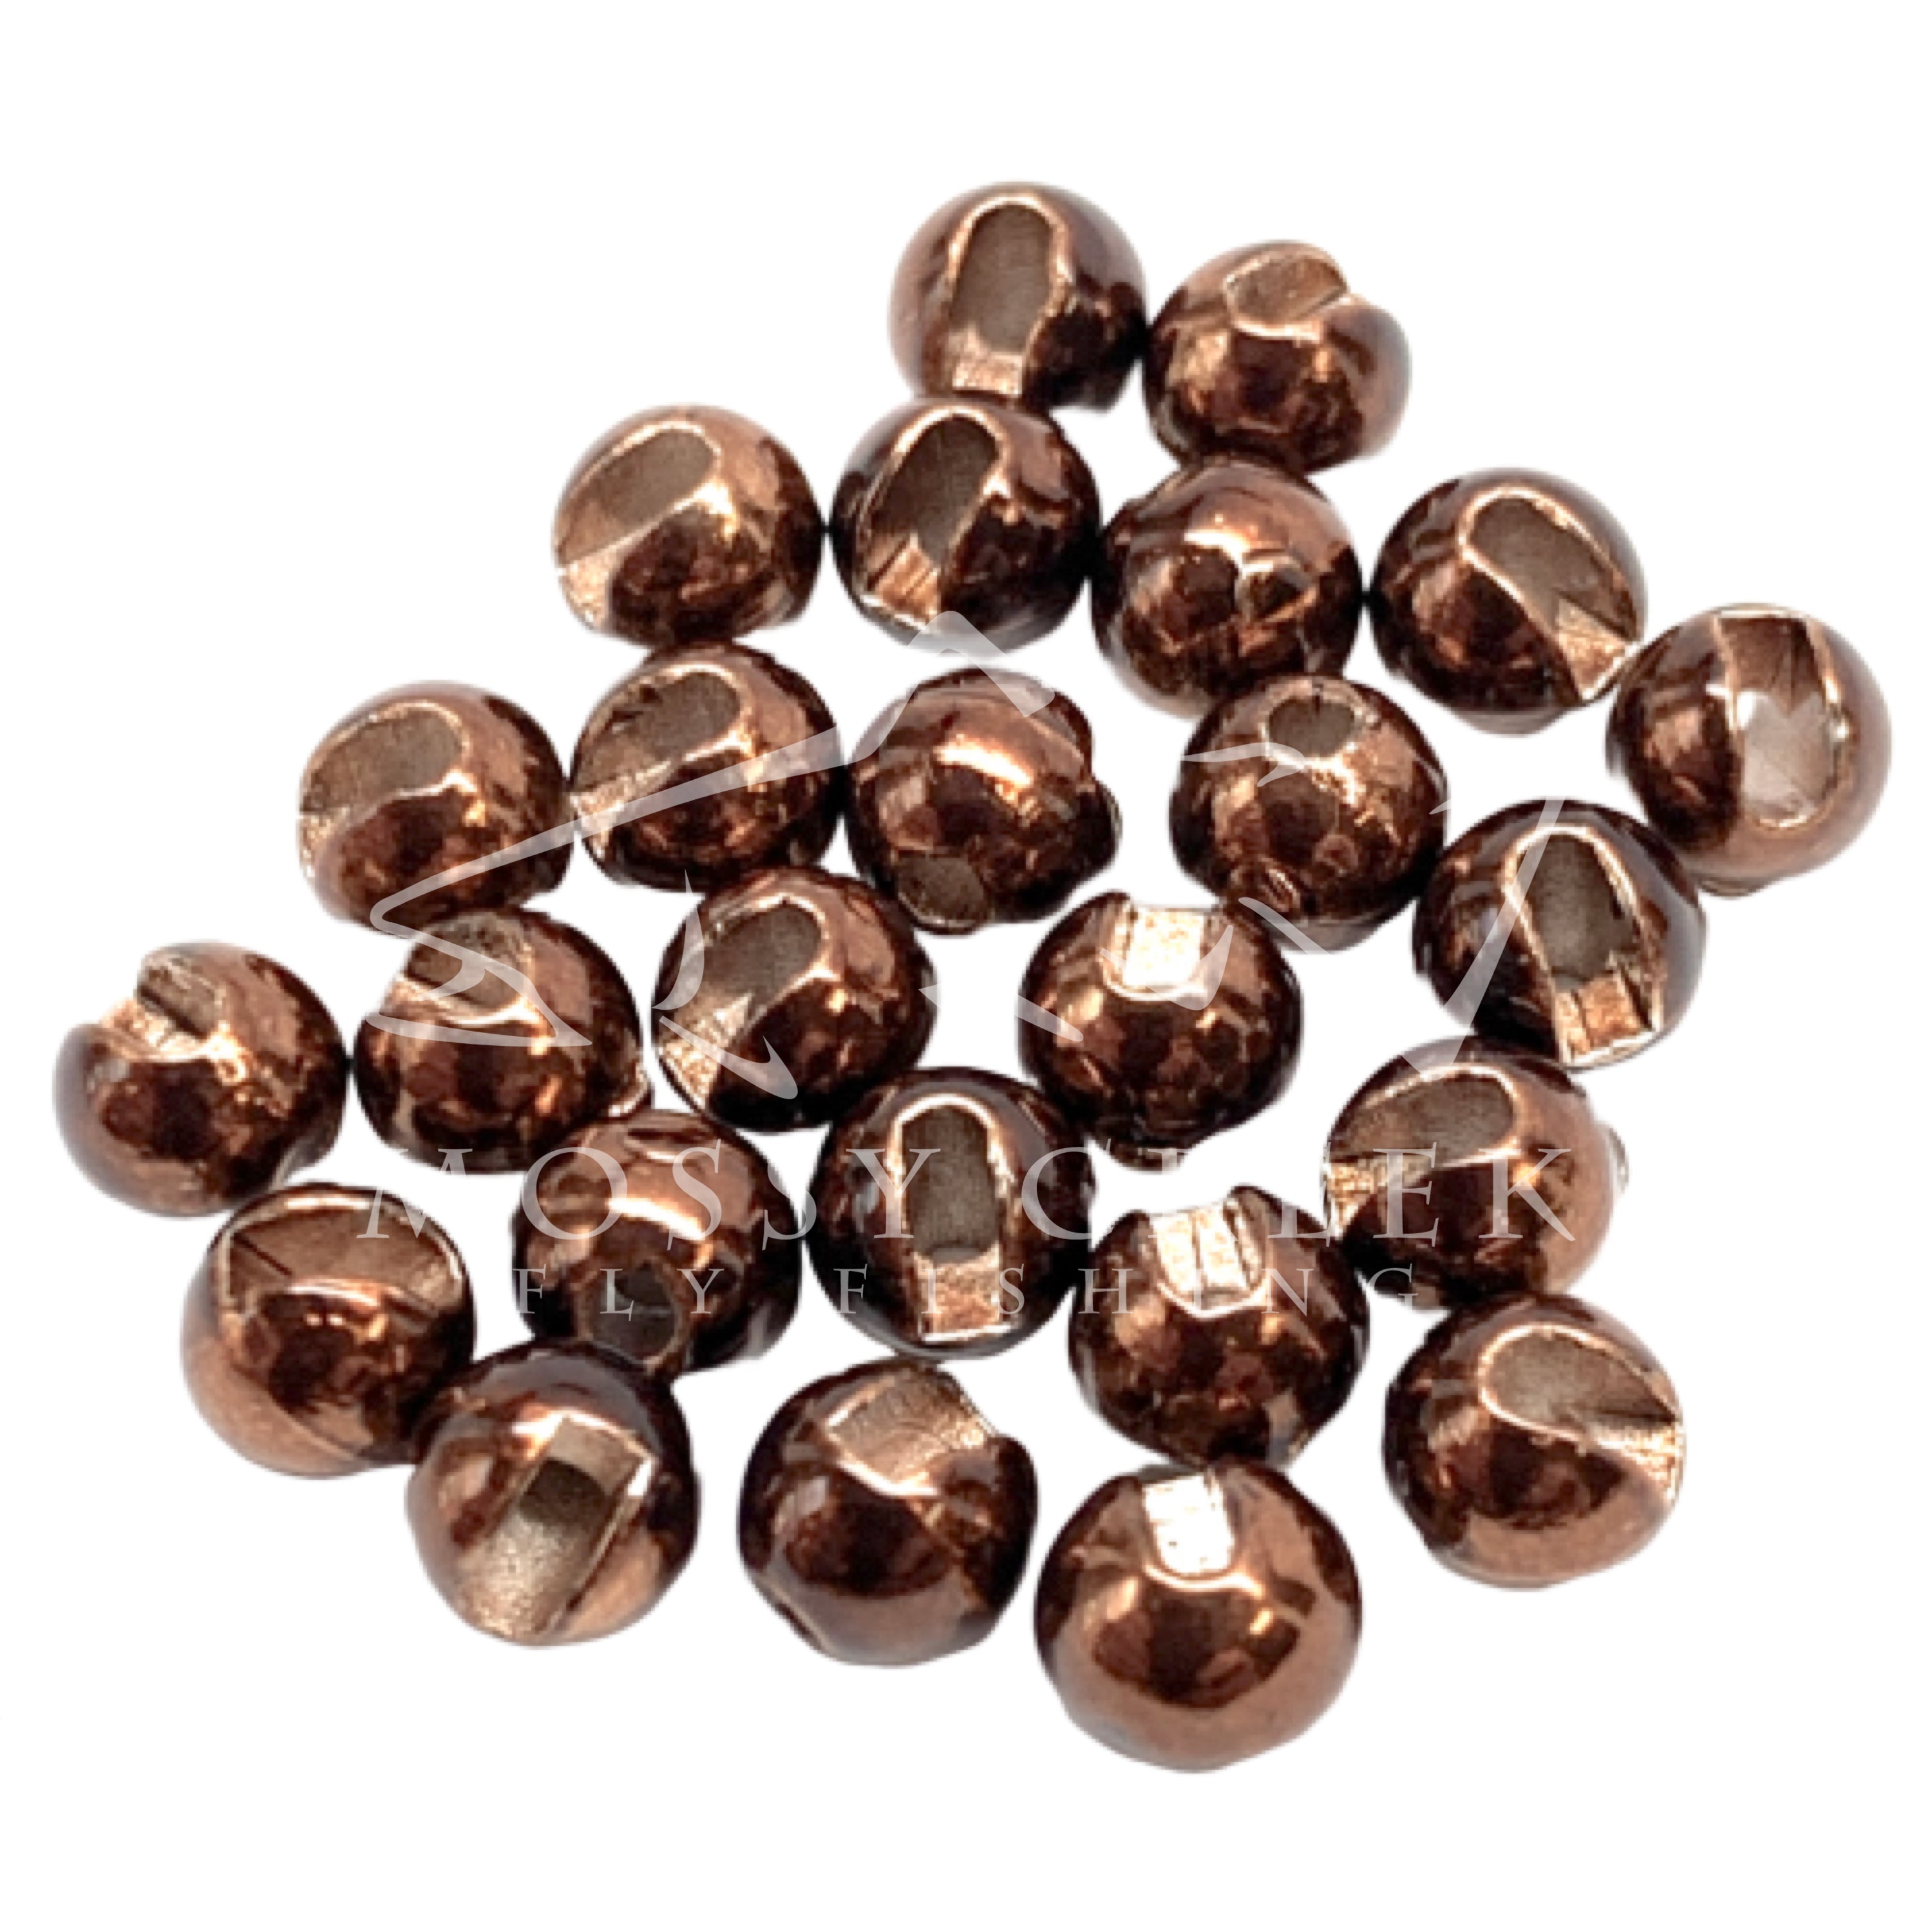 Gold Tungsten Fly Tying Beads 1/16 5/64 3/32 7/64 1/8 5/32 3